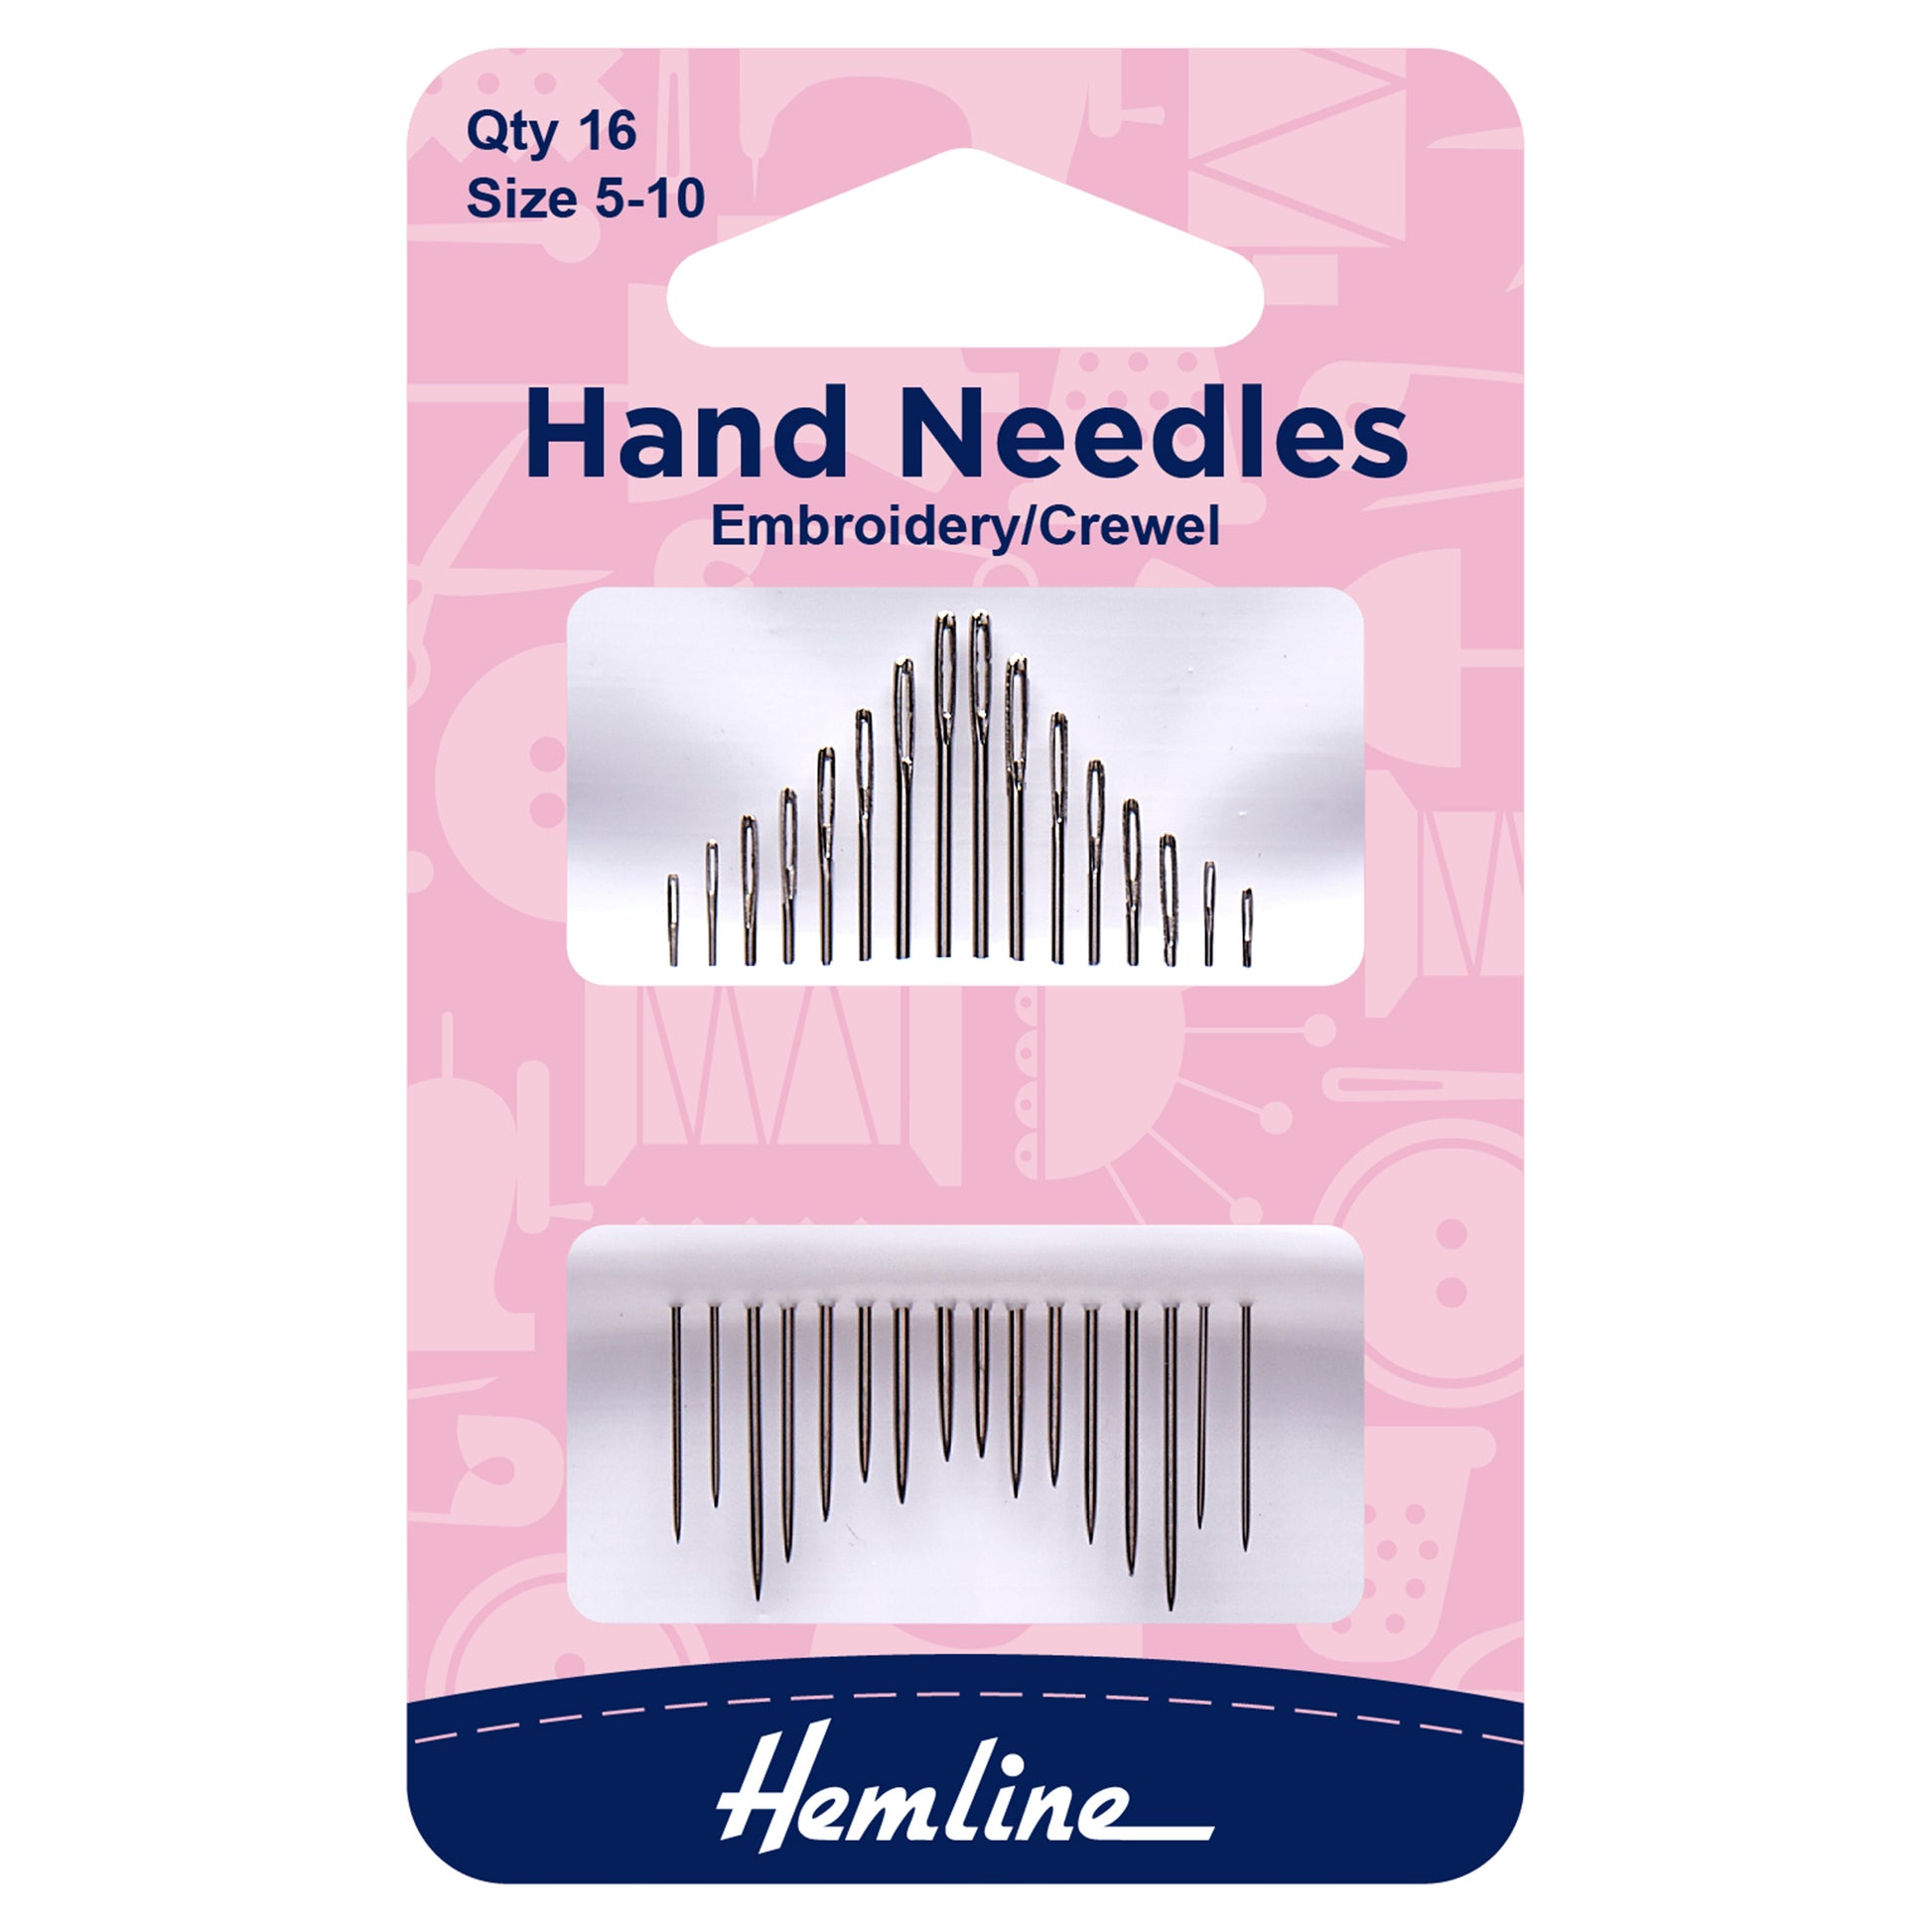 Hand Needles -Embroidery/Crewel Size 5-10